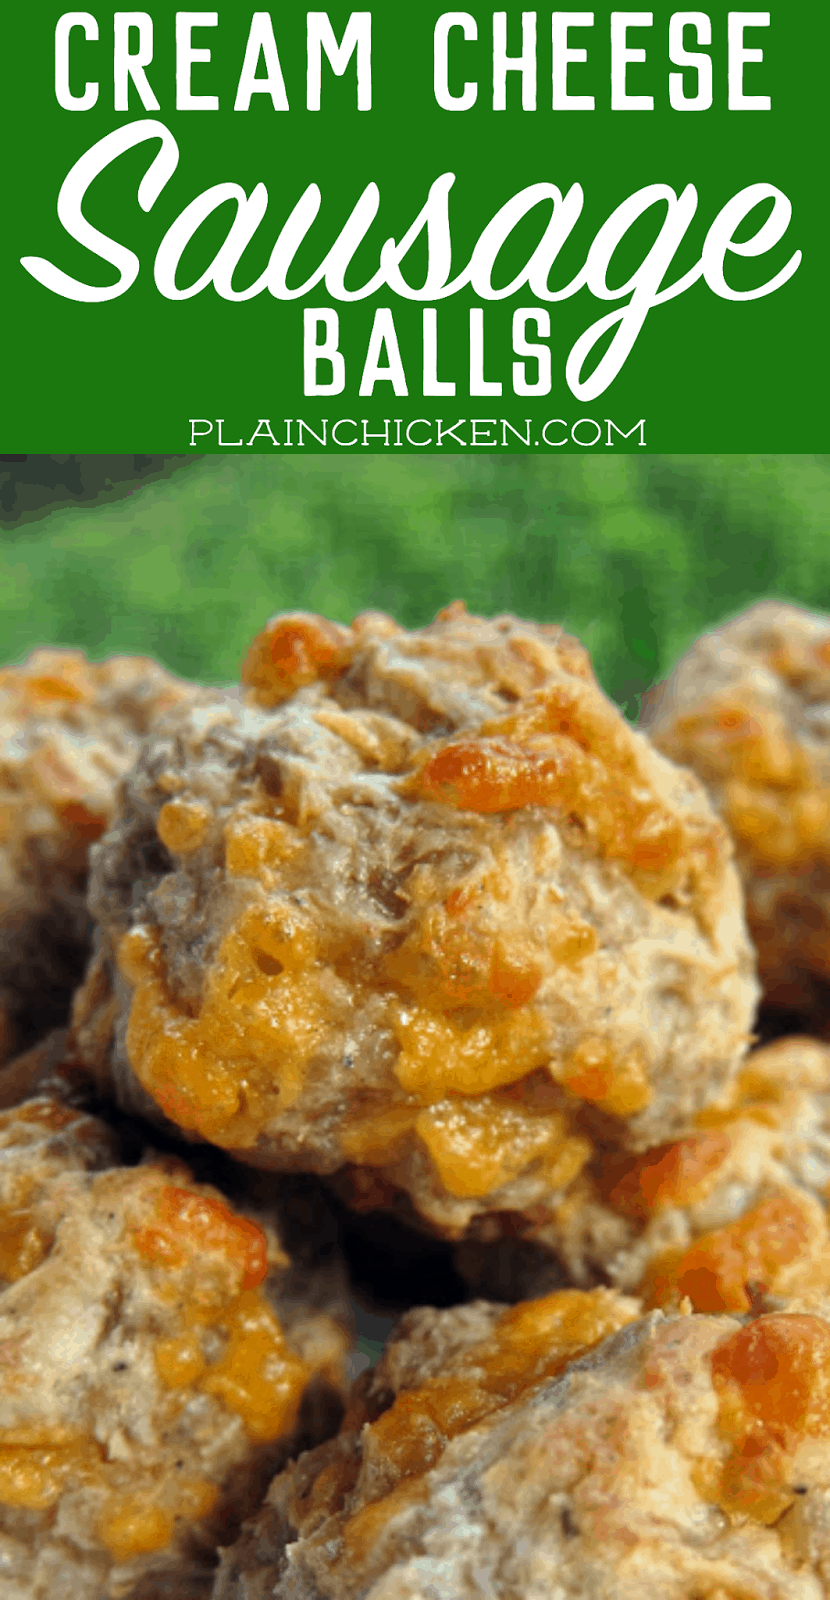 Cream Cheese Sausage Balls - this recipe will change the way you make sausage ball forever! Seriously THE BEST sausage balls EVER!